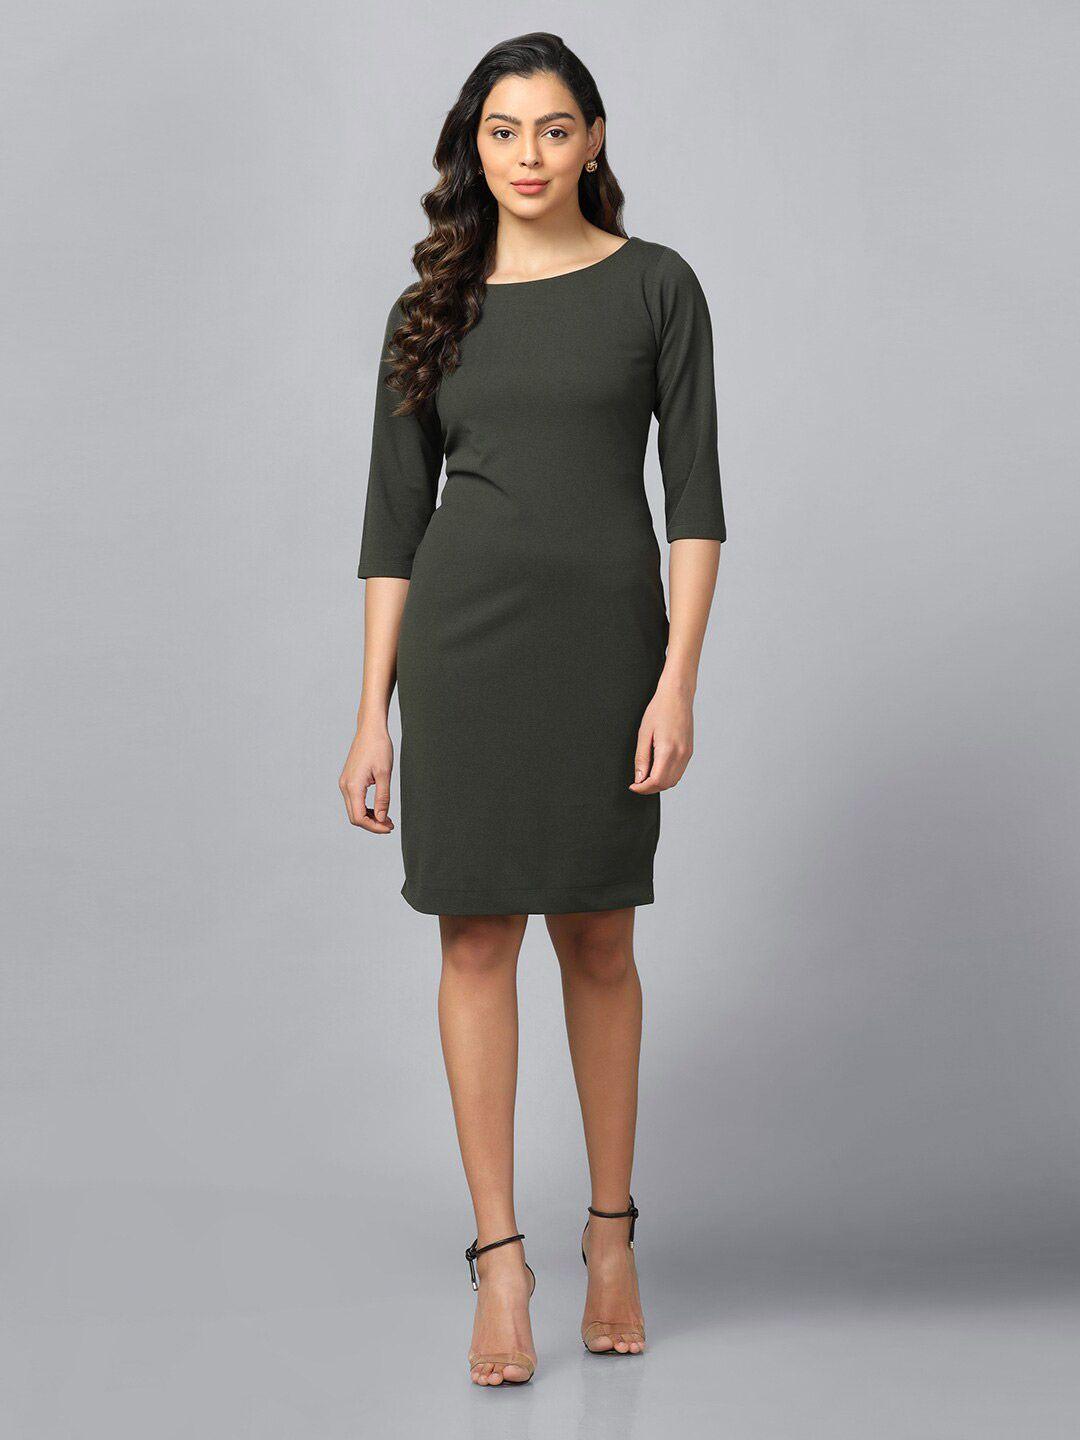 powersutra boat neck three-quarter sleeves knitted sheath dress